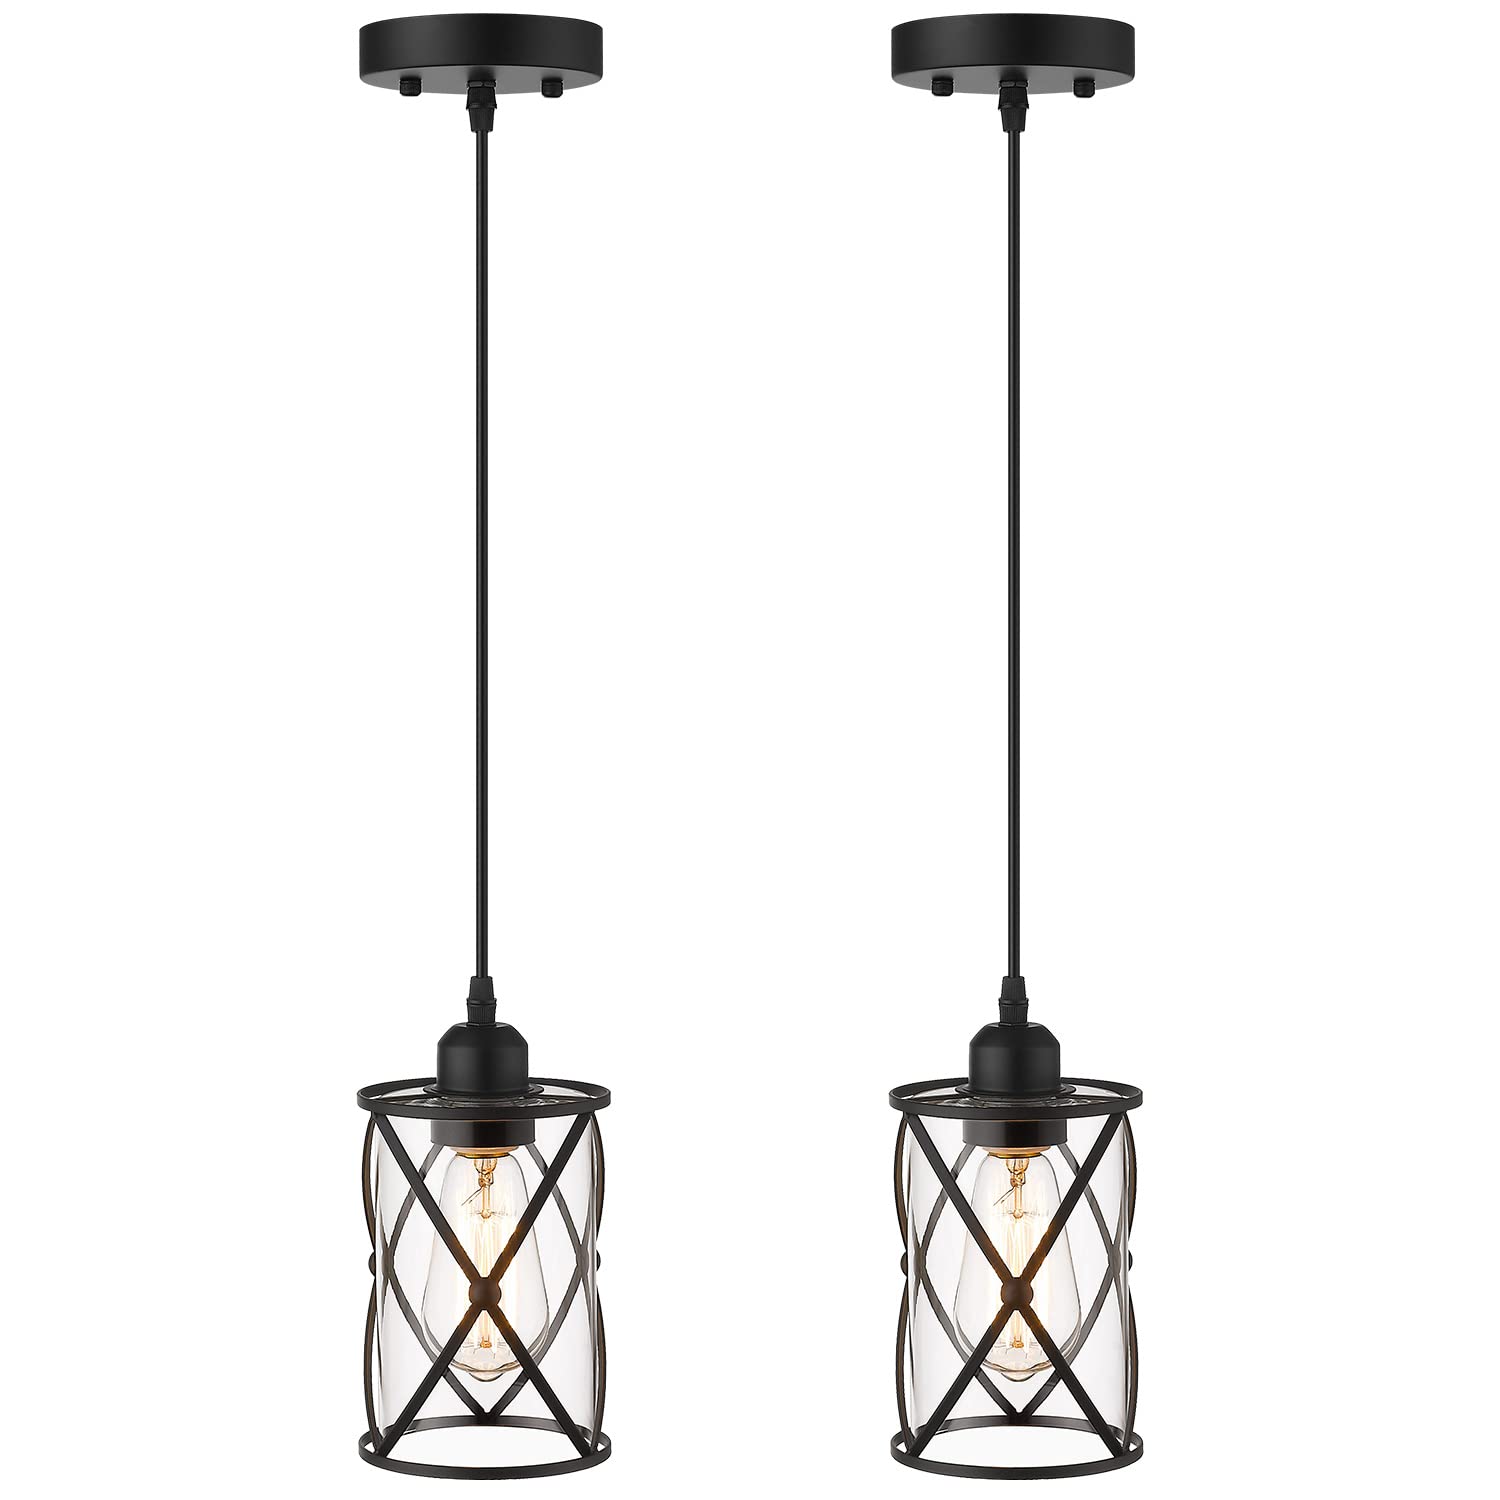 Osimir Industrial Pendant Light, 2 Pack Mini Glass Pendant Light for Kitchen, Cage Pendant Lighting in Black Finish with Clear Glass, Adjustable Length, CH9176-1-2PK